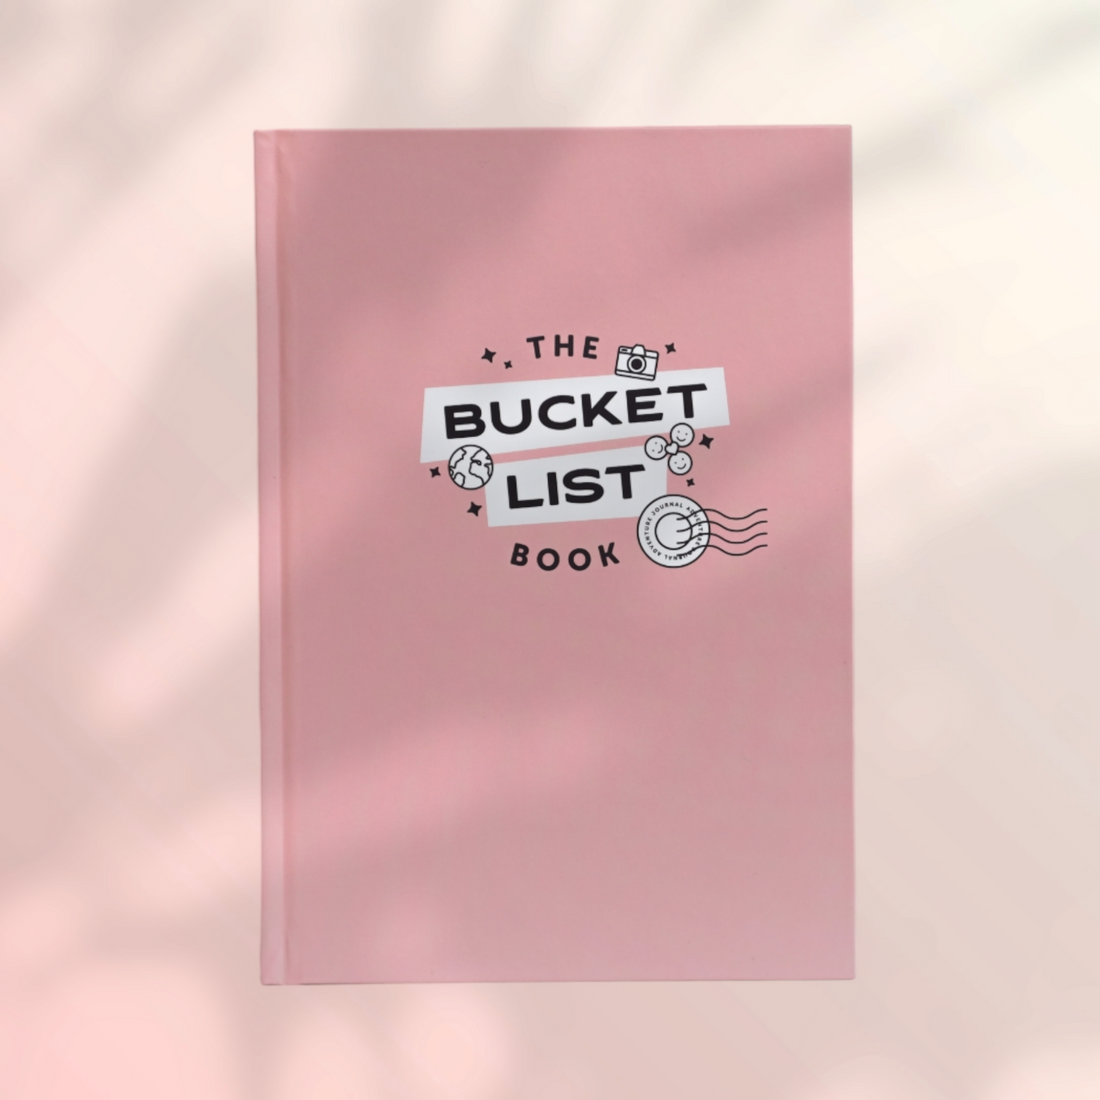 Here are some reasons why you might consider buying a bucket list book: